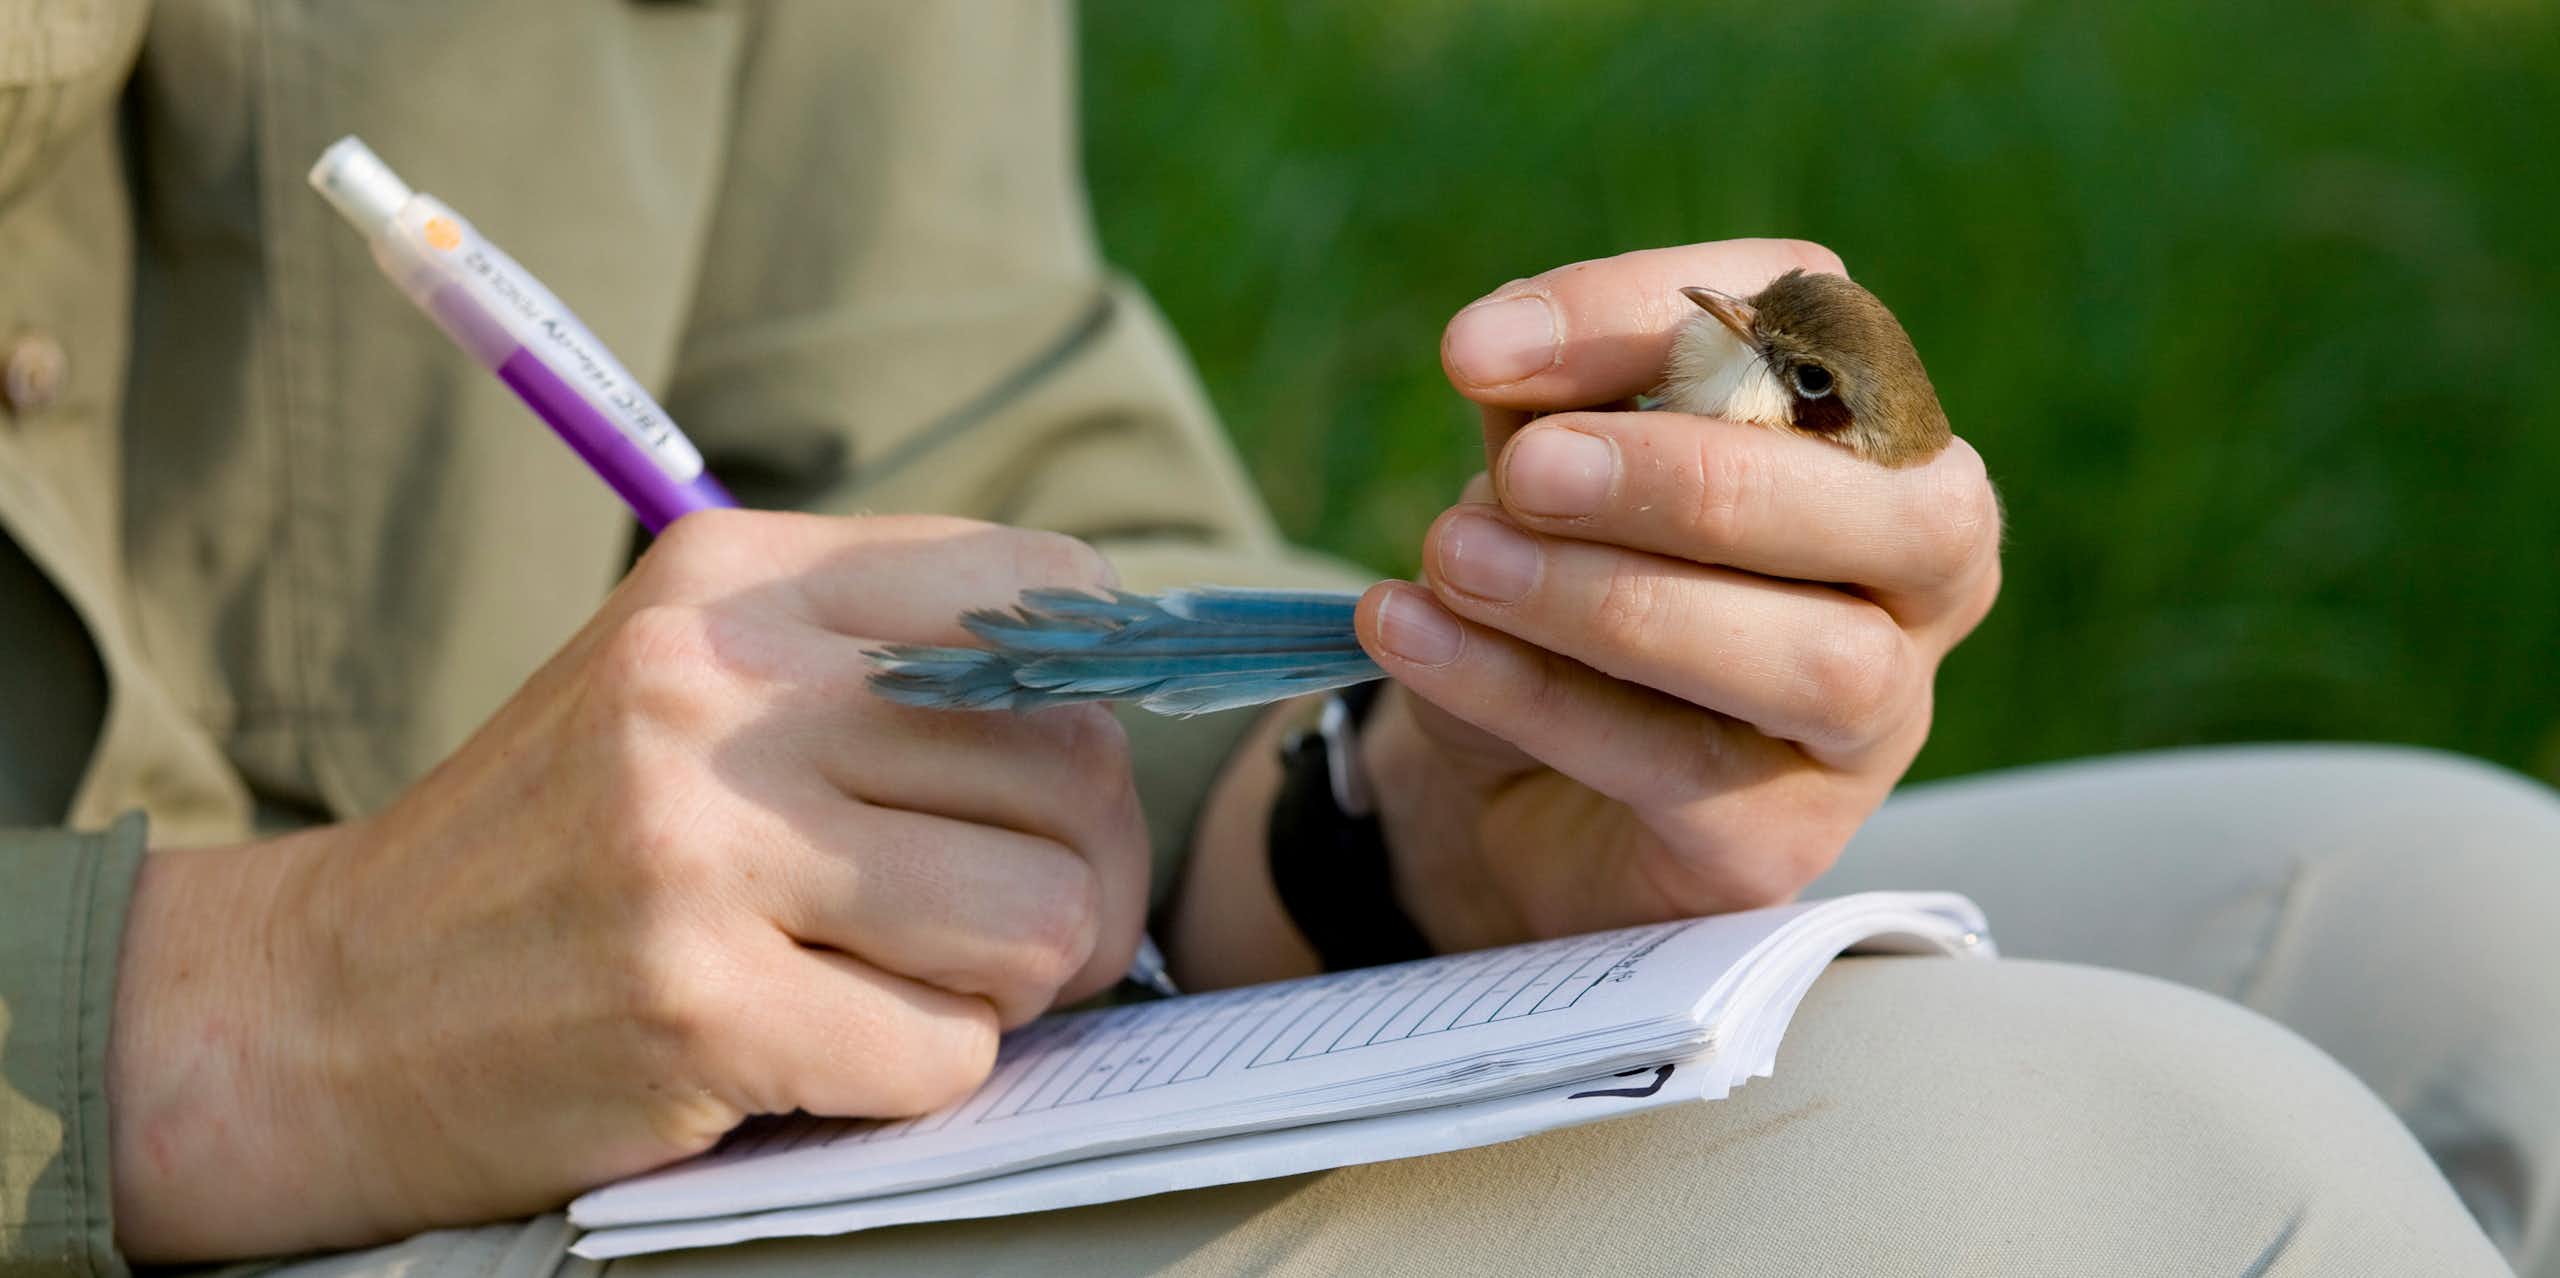 Close up of a seated man holding a small bird with one hand and taking notes with the other.